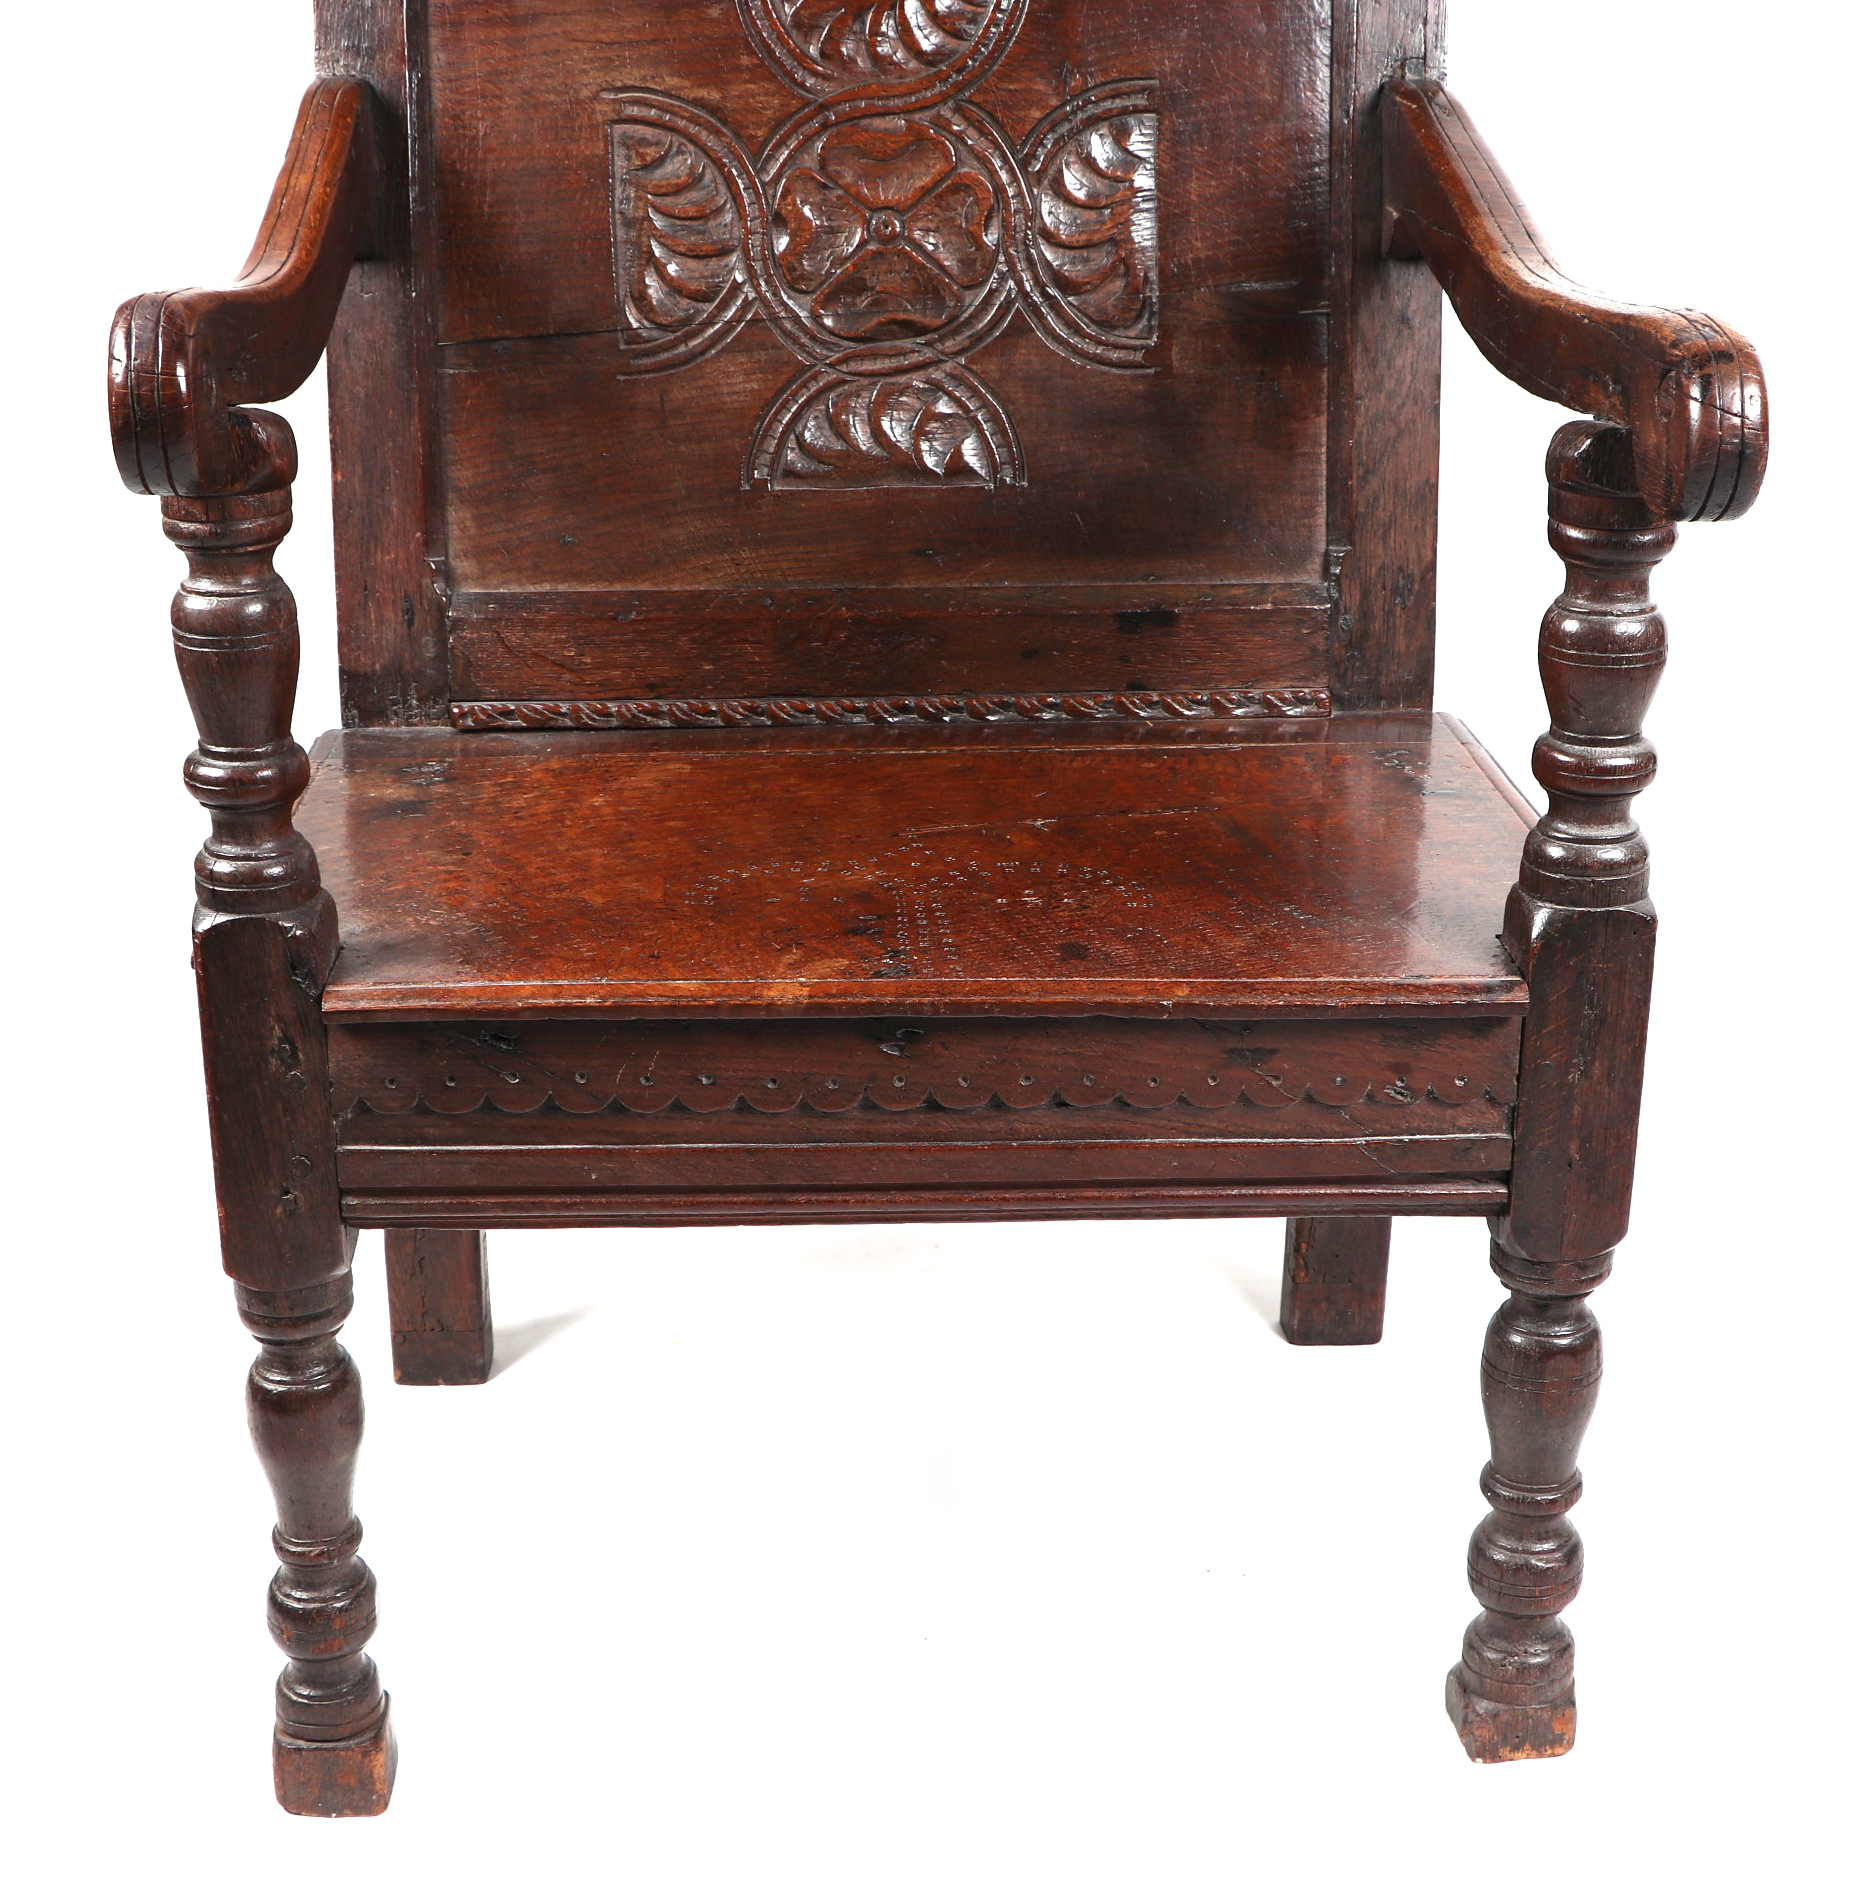 An 18th century style Wainscot type oak chair. - Image 7 of 8